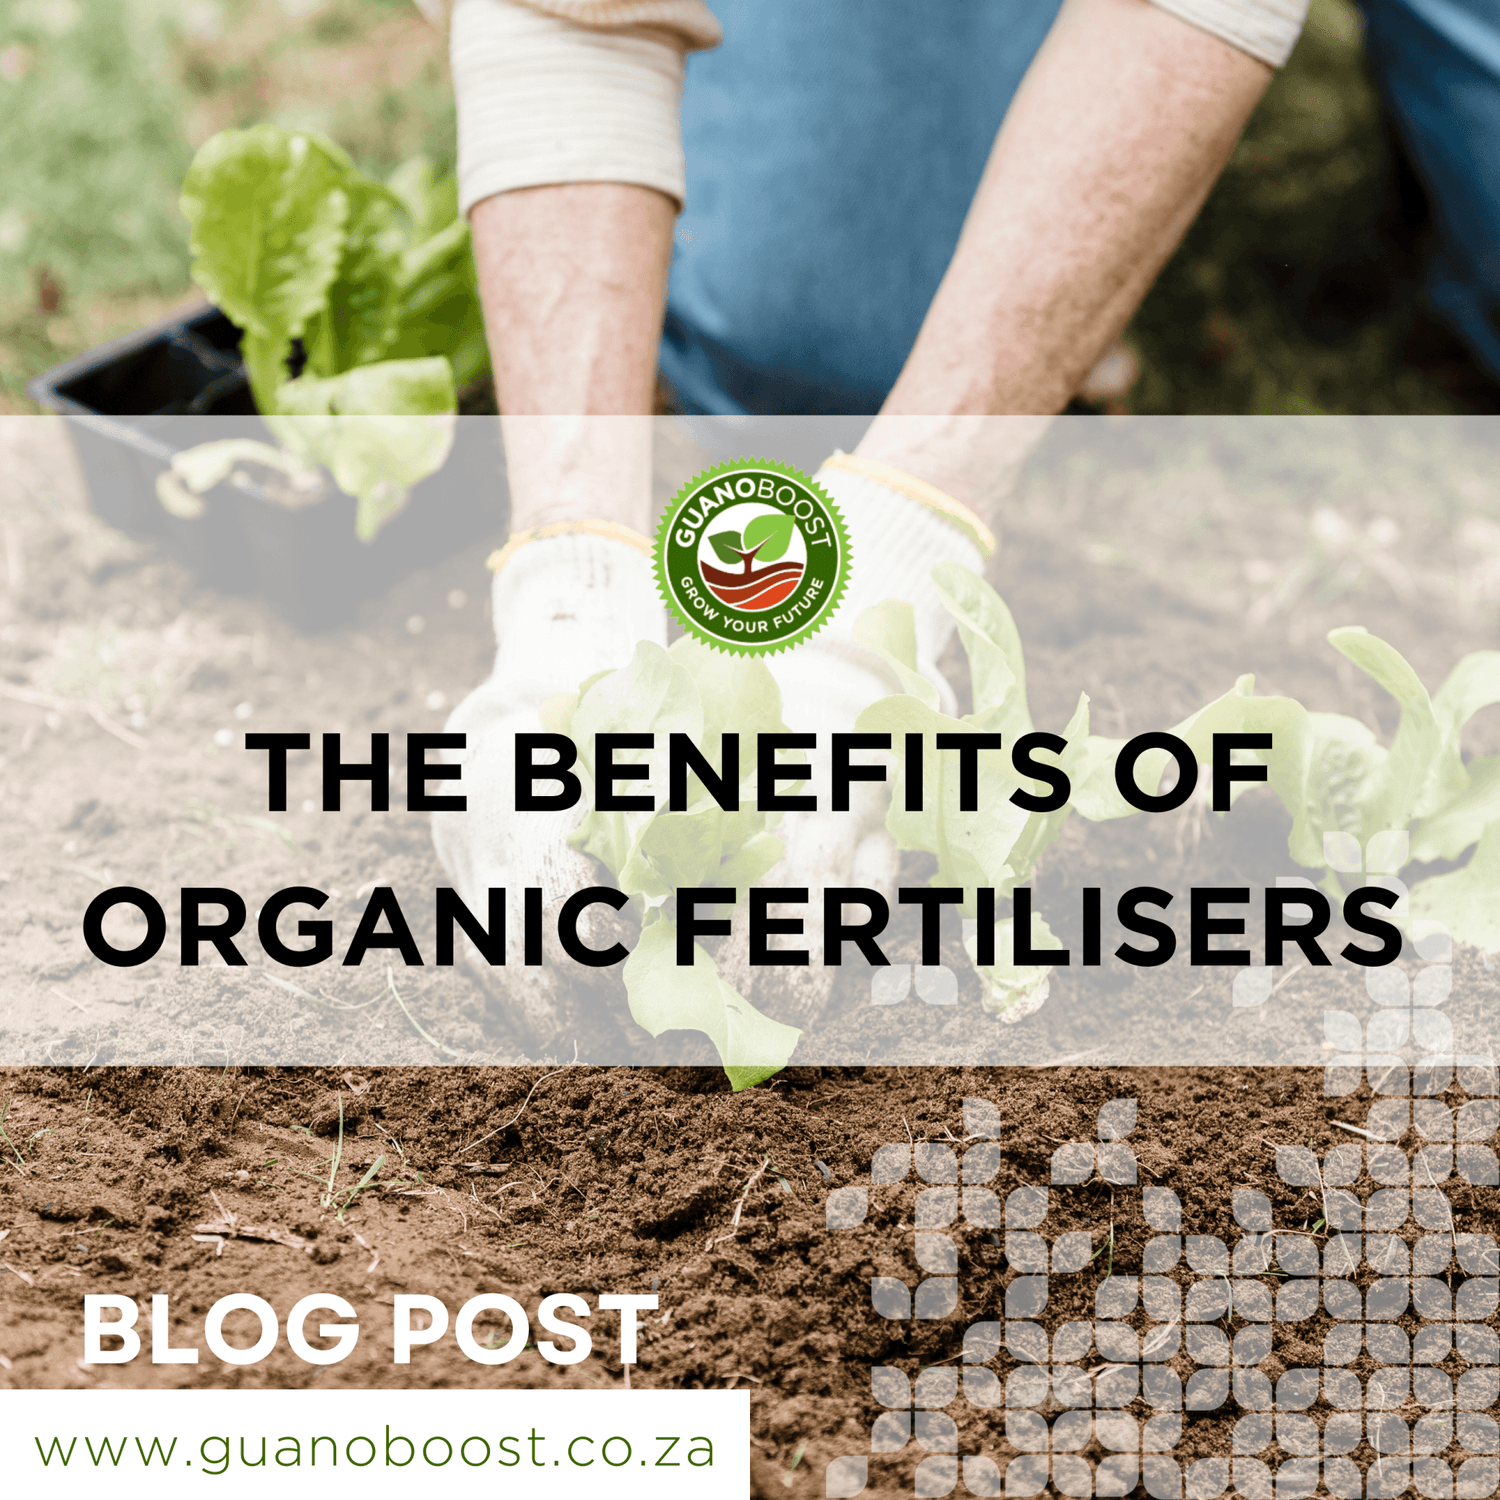 The Benefits of Organic Fertilisers: Safer, Environmentally Friendly, and Essential to Use Compared to Chemical Fertilisers - GuanoBoost